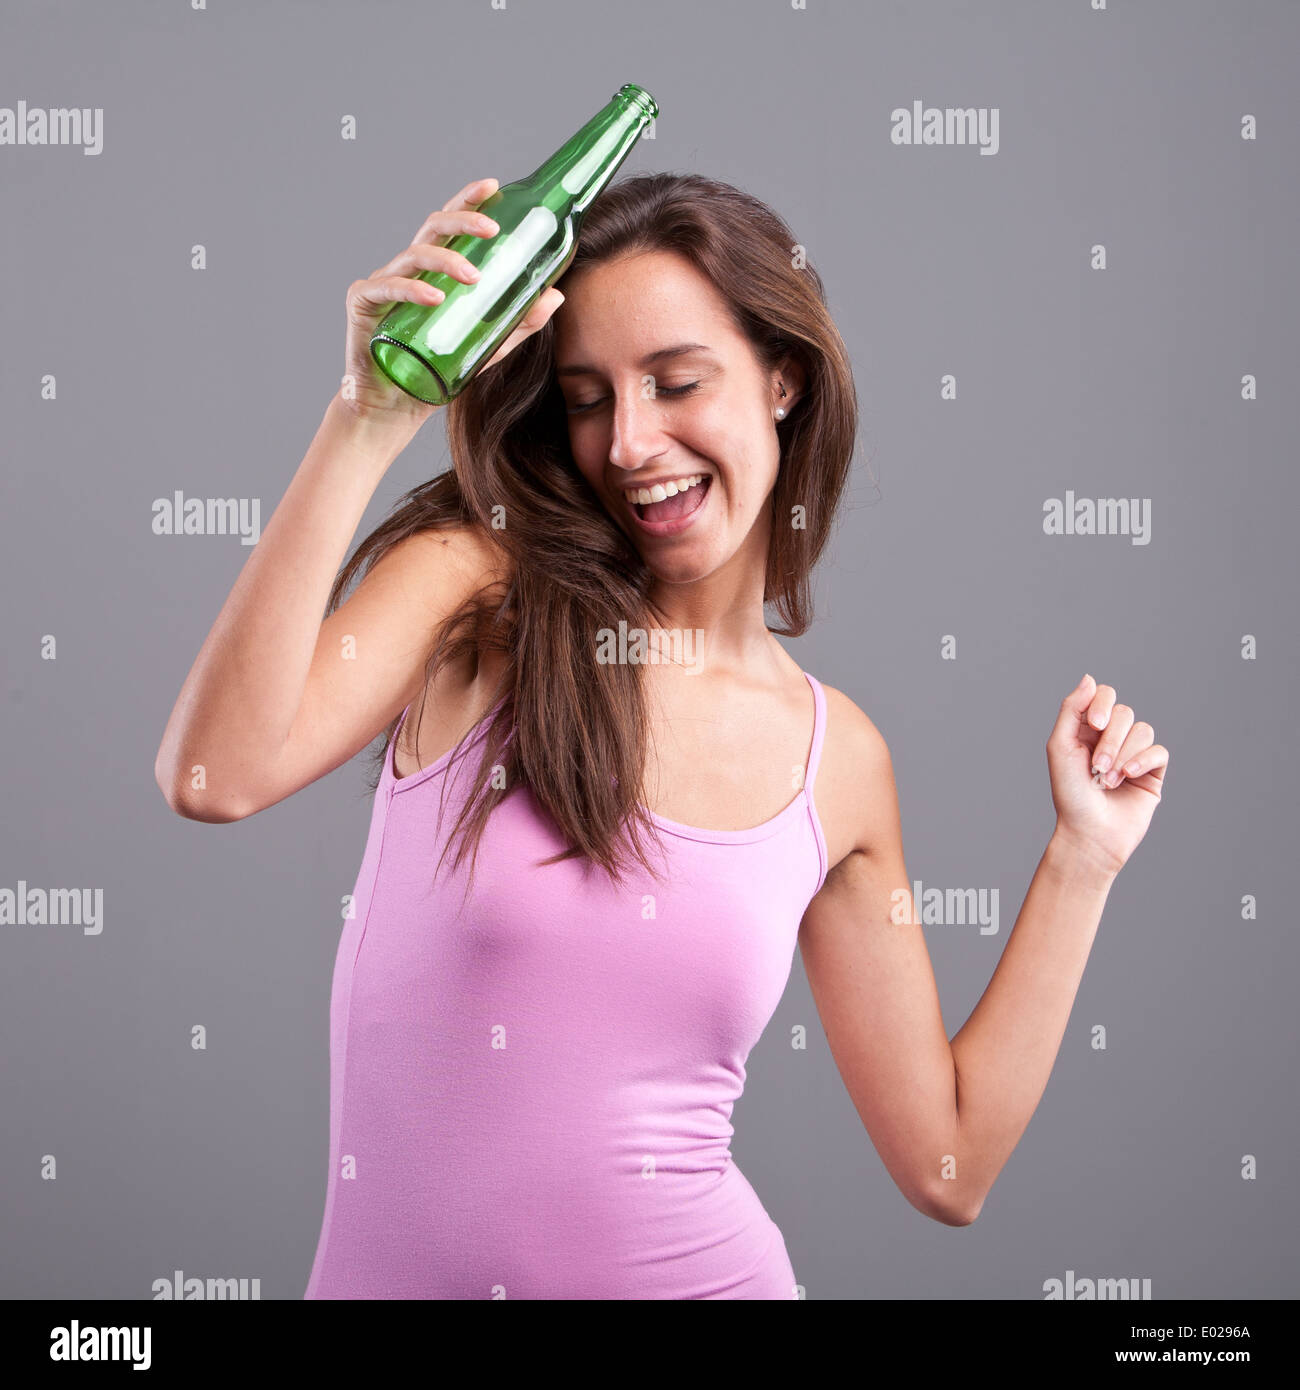 Happy girl dancing or staggering with a green bottle of beer Stock ...